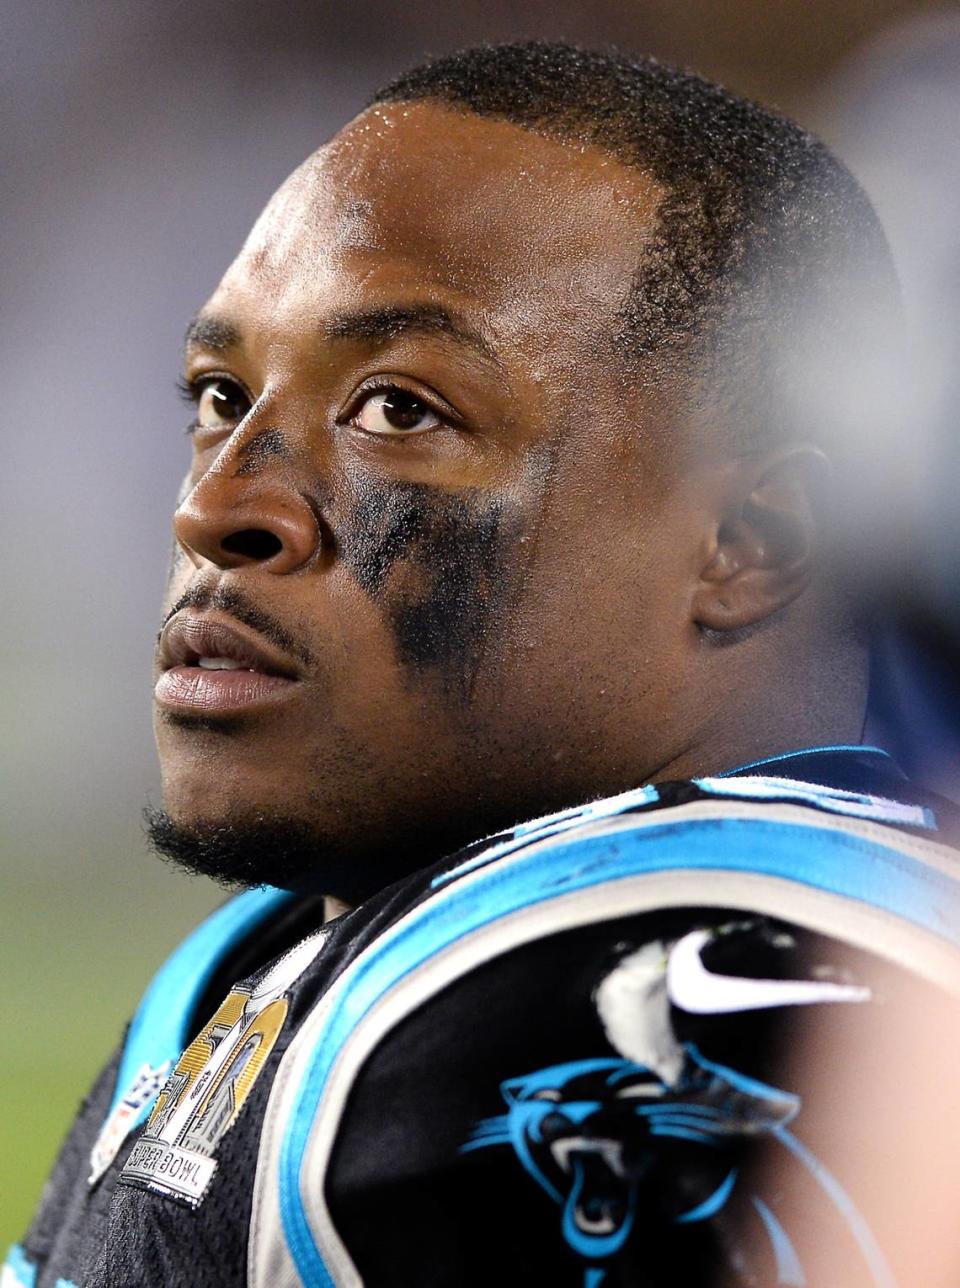 Carolina Panthers fullback Mike Tolbert looks toward the video board during the fourth quarter vs. the Denver Broncos in Super Bowl 50 on Feb. 7, 2016. The Denver Broncos defeated the Carolina Panthers 24-10. Tolbert, who didn’t fumble a single time in the regular season in five years for the Panthers, fumbled twice in the Super Bowl and lost one of them.